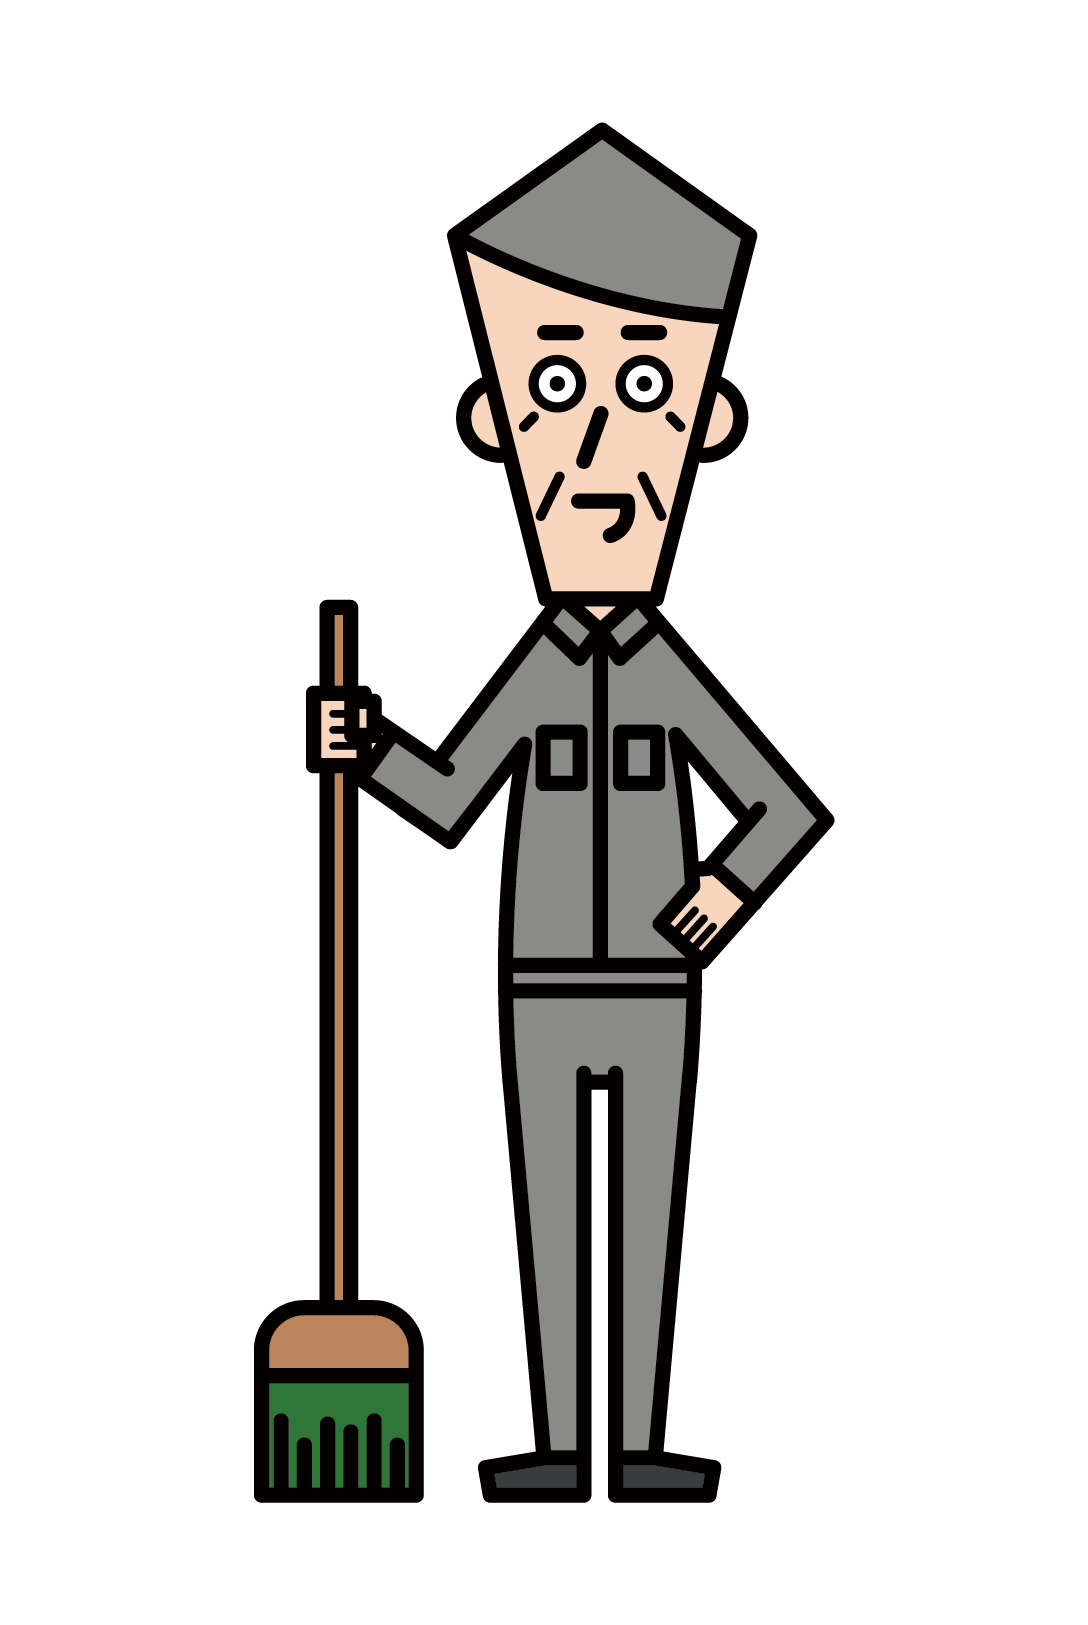 Illustration of a working elderly person (grandfather)